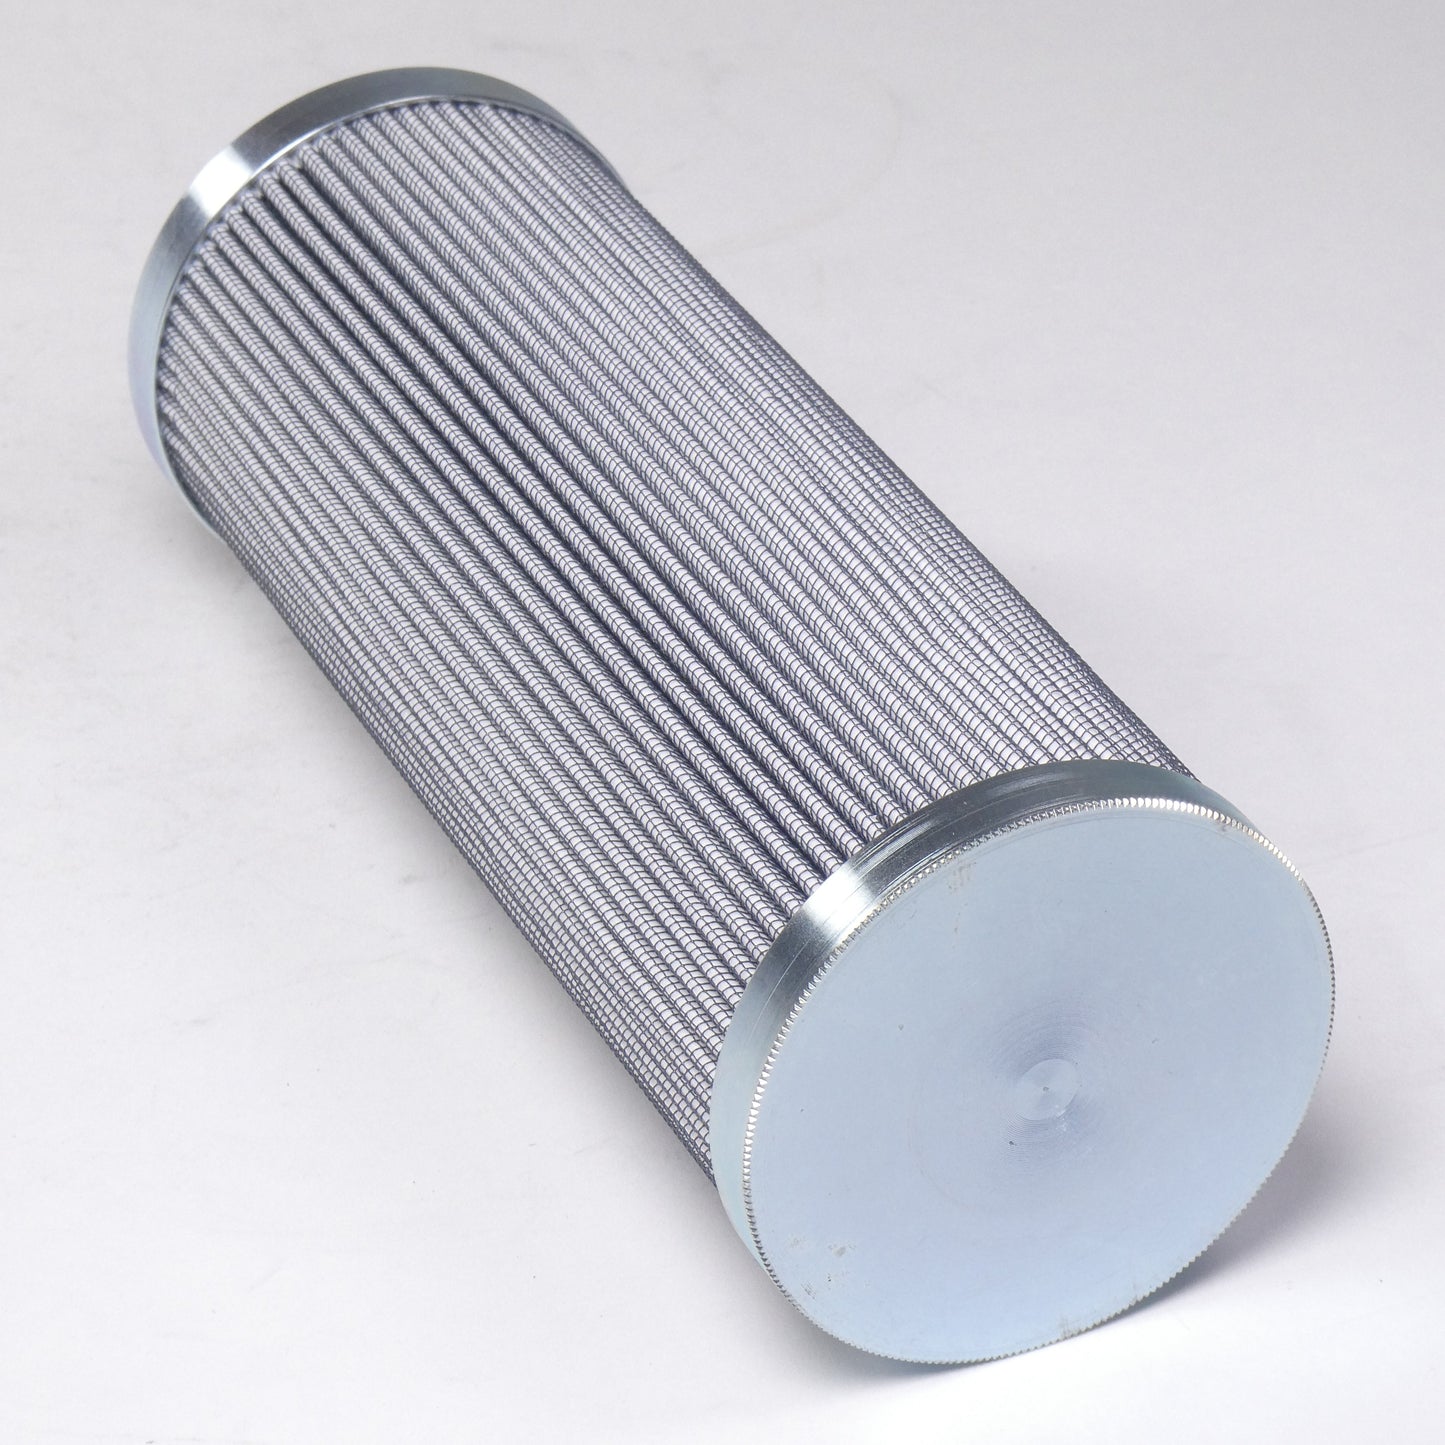 Hydrafil Replacement Filter Element for Pall HC9601ENJ4J